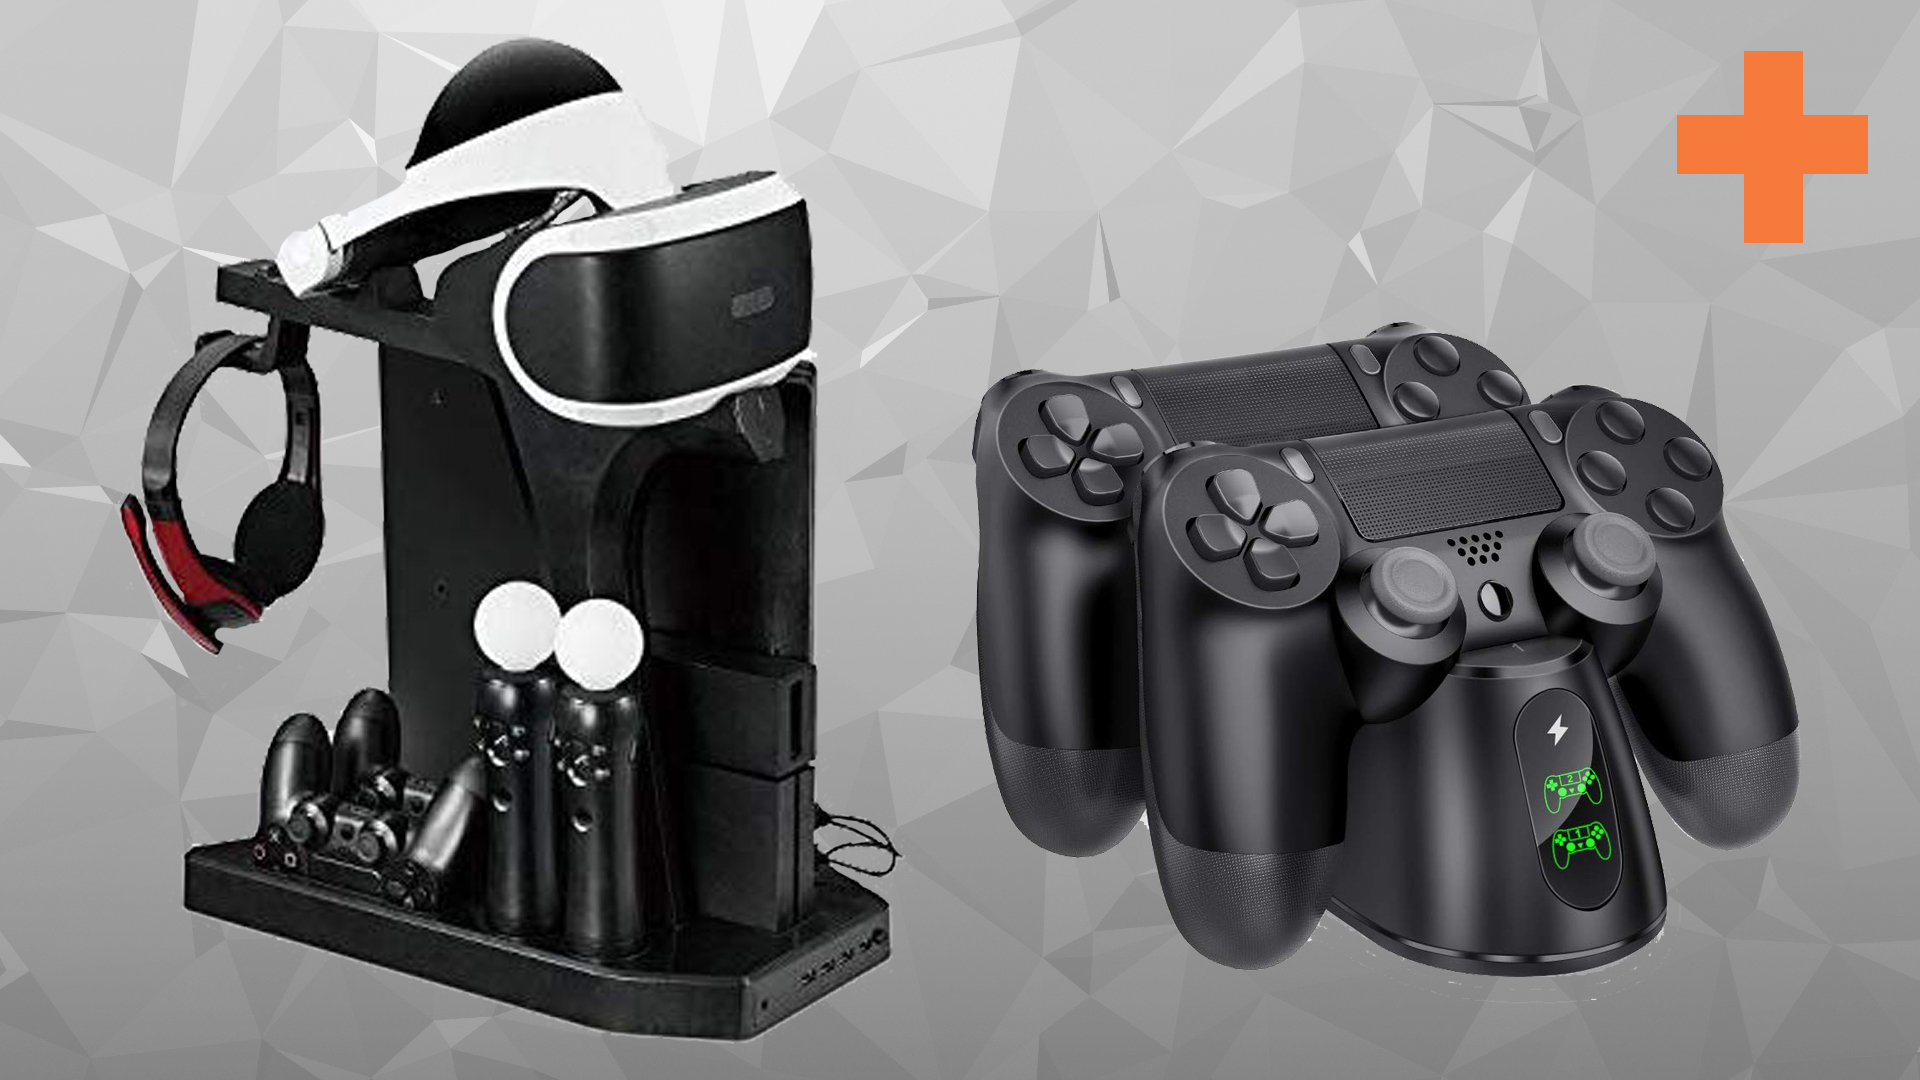 ps4 controller charging station for 4 controllers